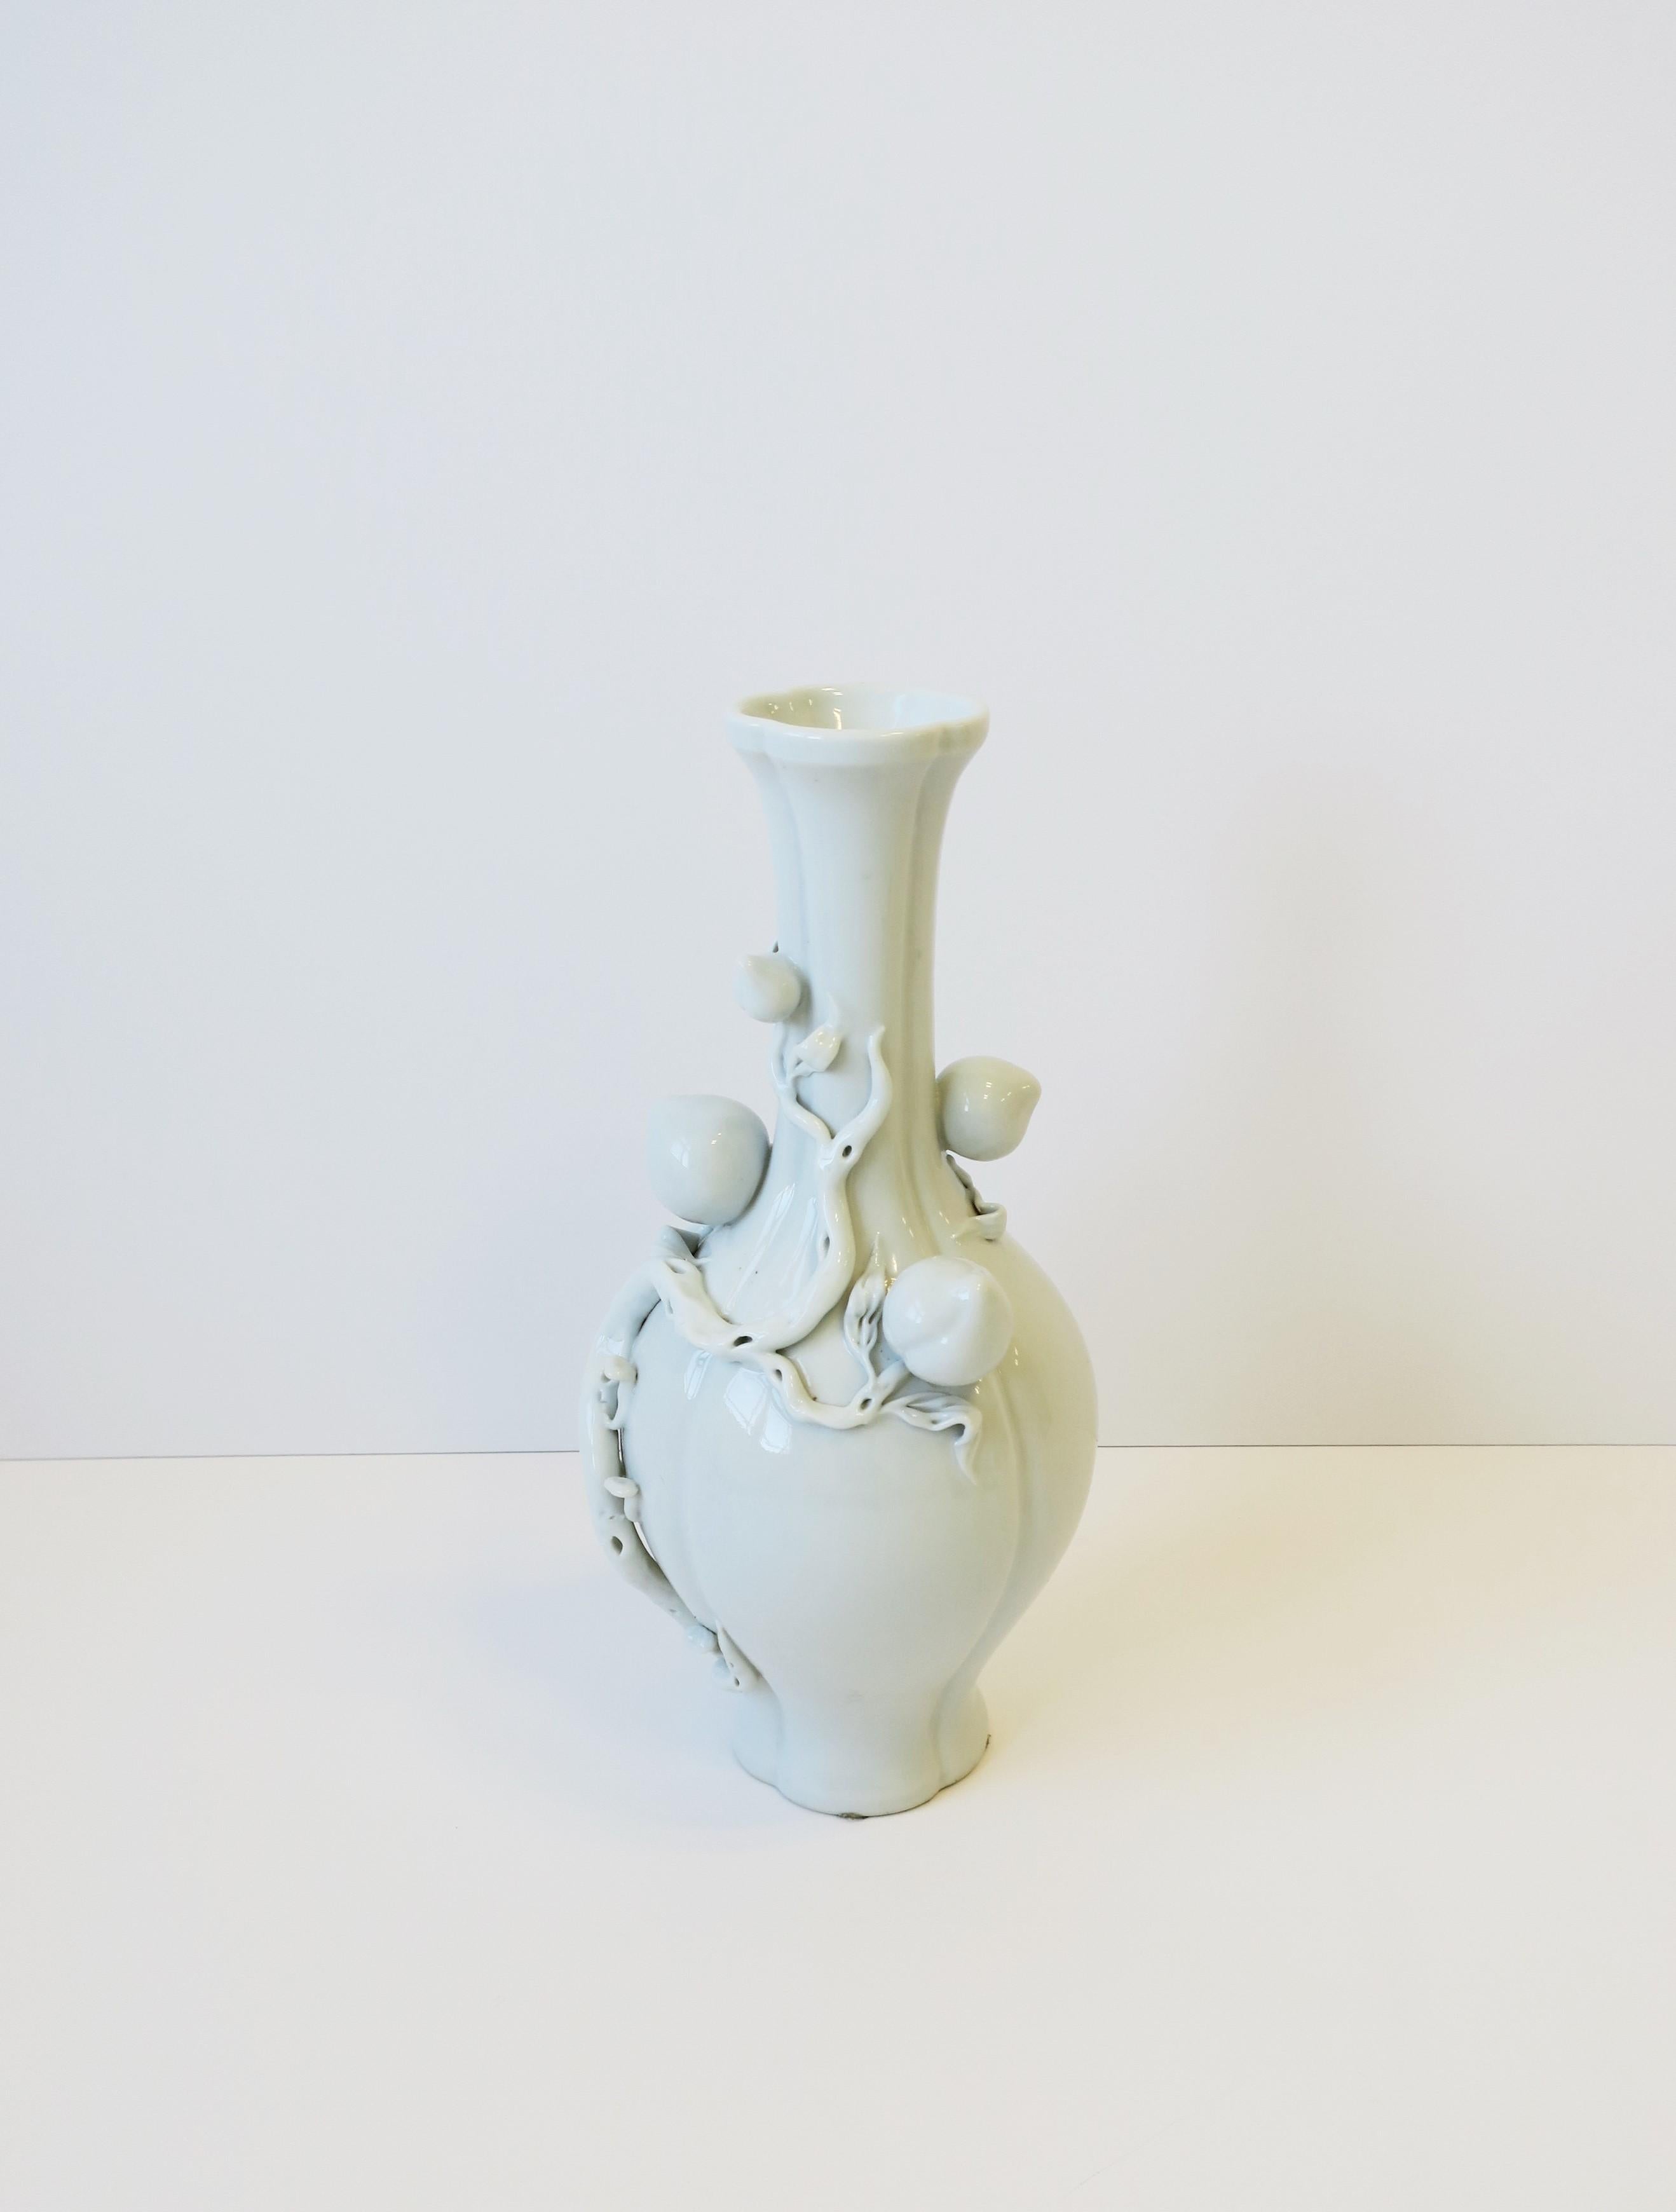 Ceramic White Blanc de Chine Porcelain Vase with Fruit, Leaves and Vines For Sale